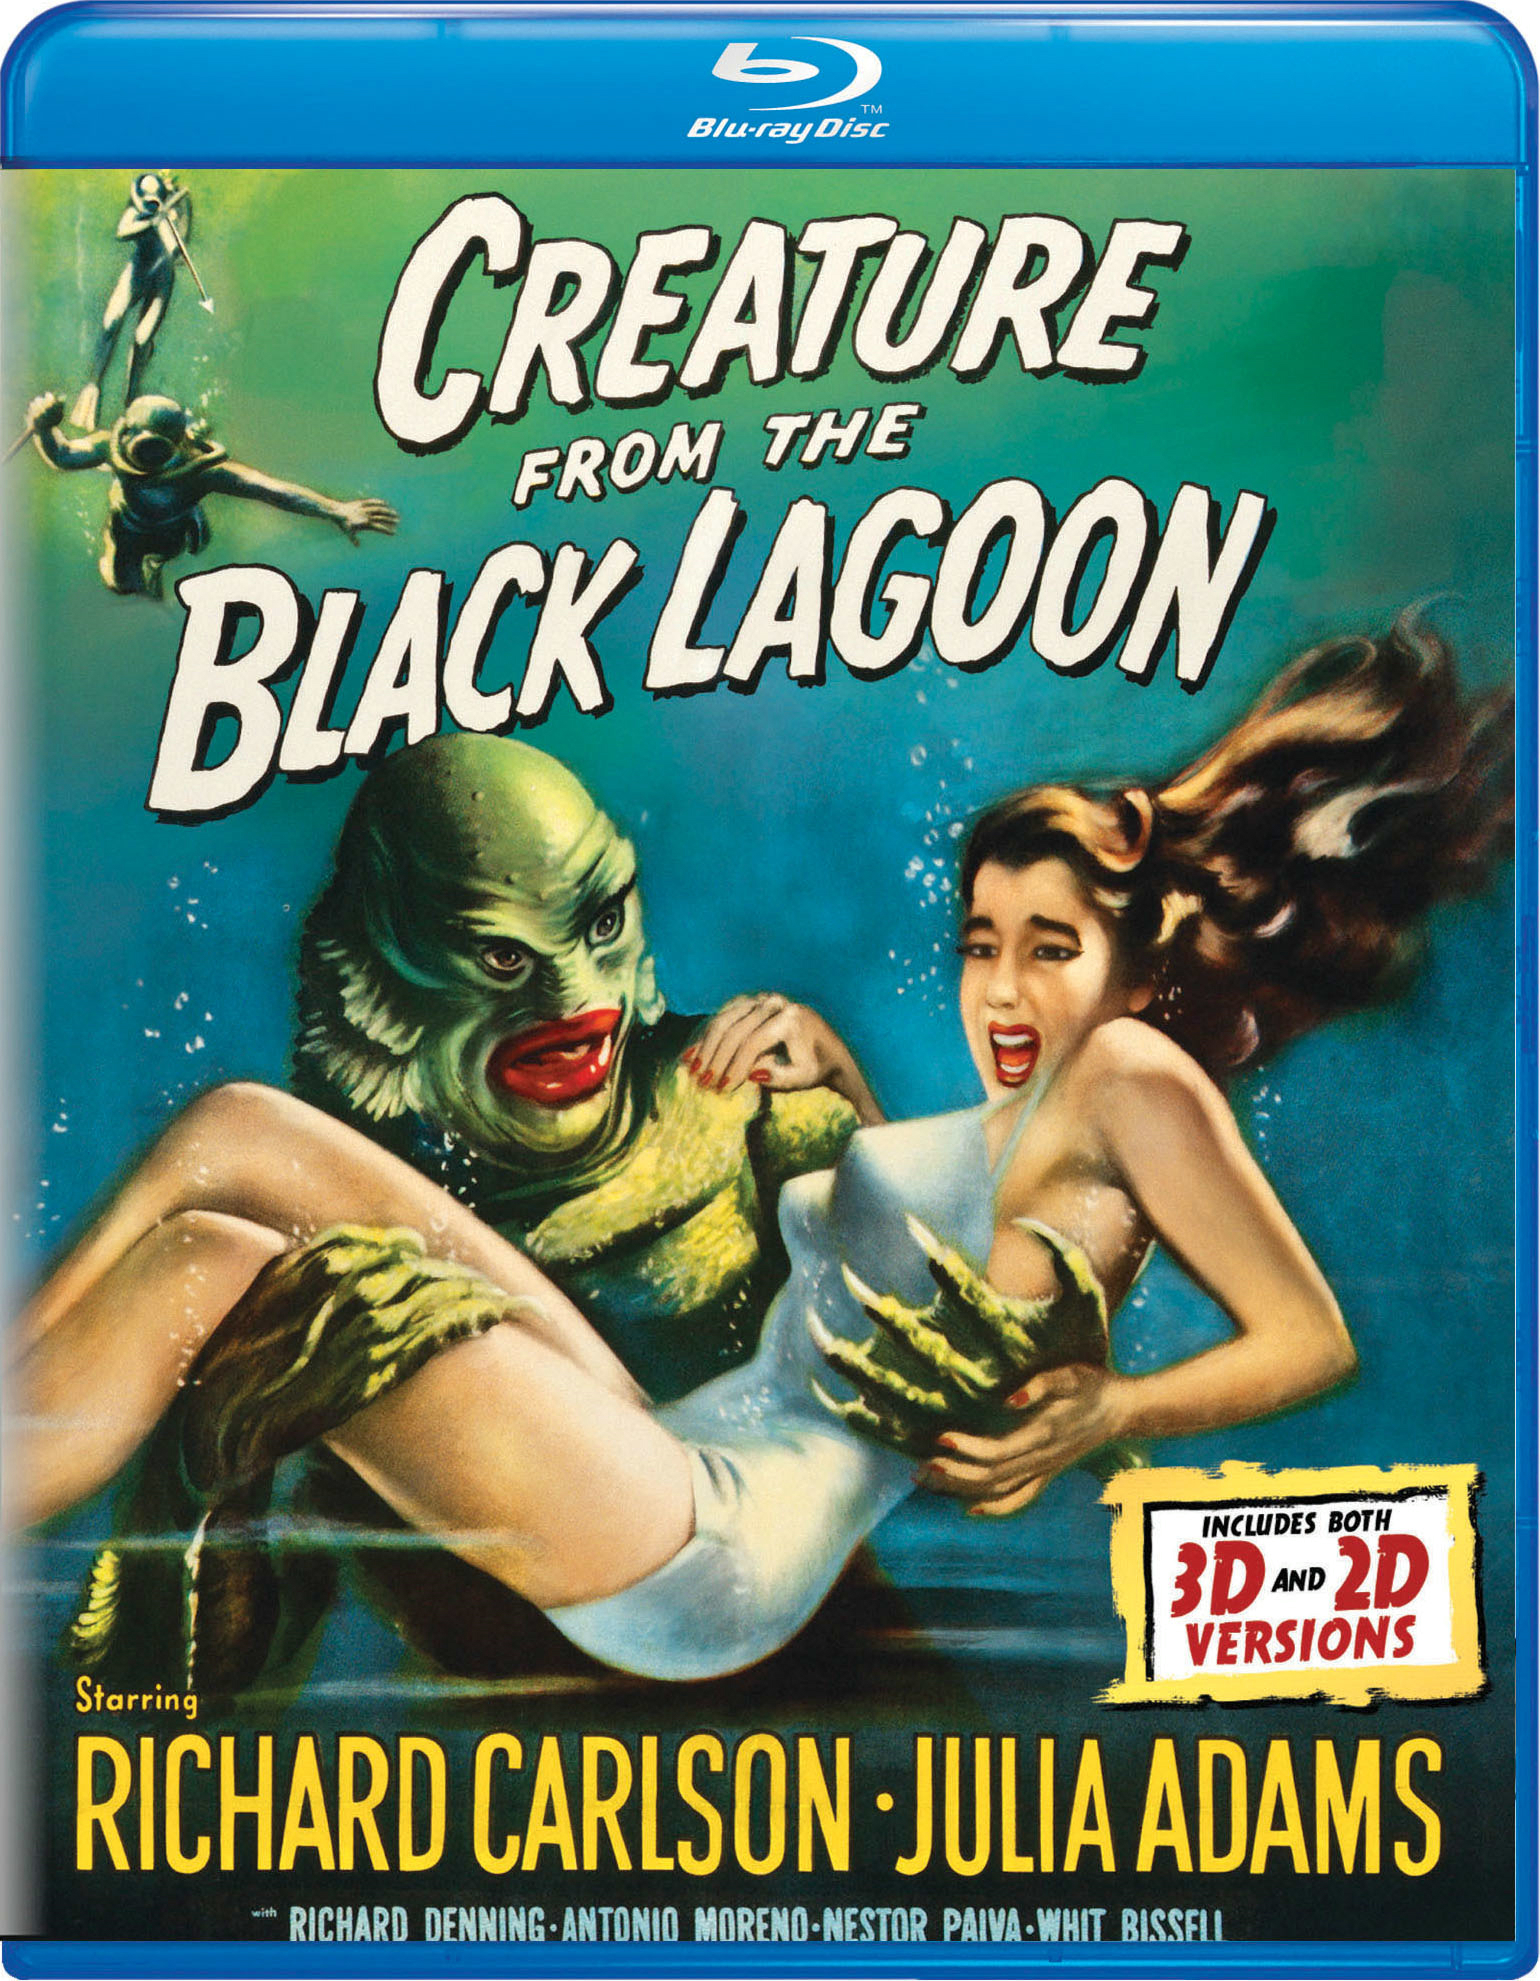 Creature From The Black Lagoon (Blu-ray 3D And 2D) - Blu-ray [ 1954 ]  - Modern Classic Movies On Blu-ray - Movies On GRUV